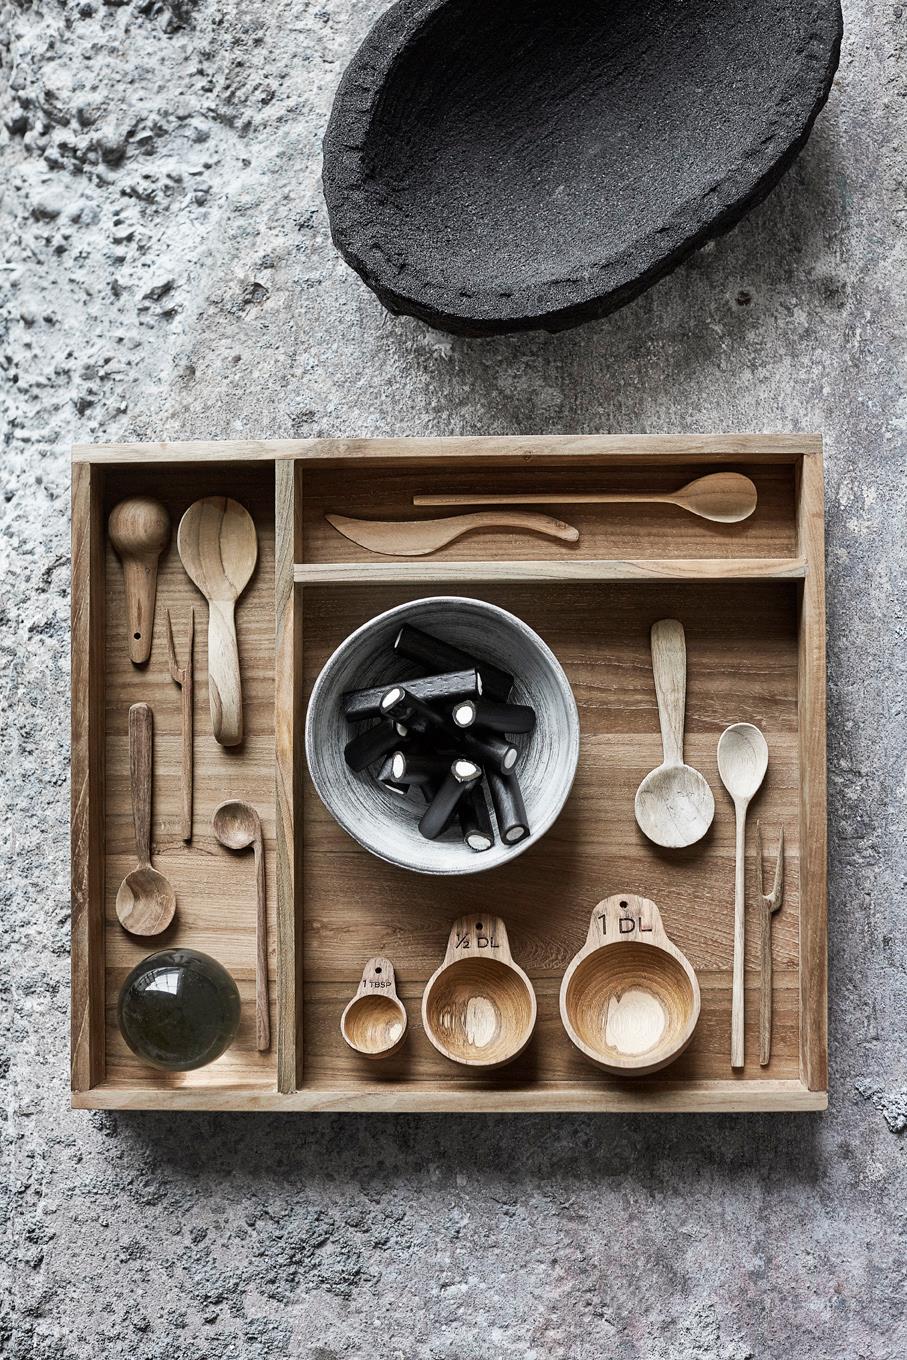 AW2016 collection from Muubs wooden items